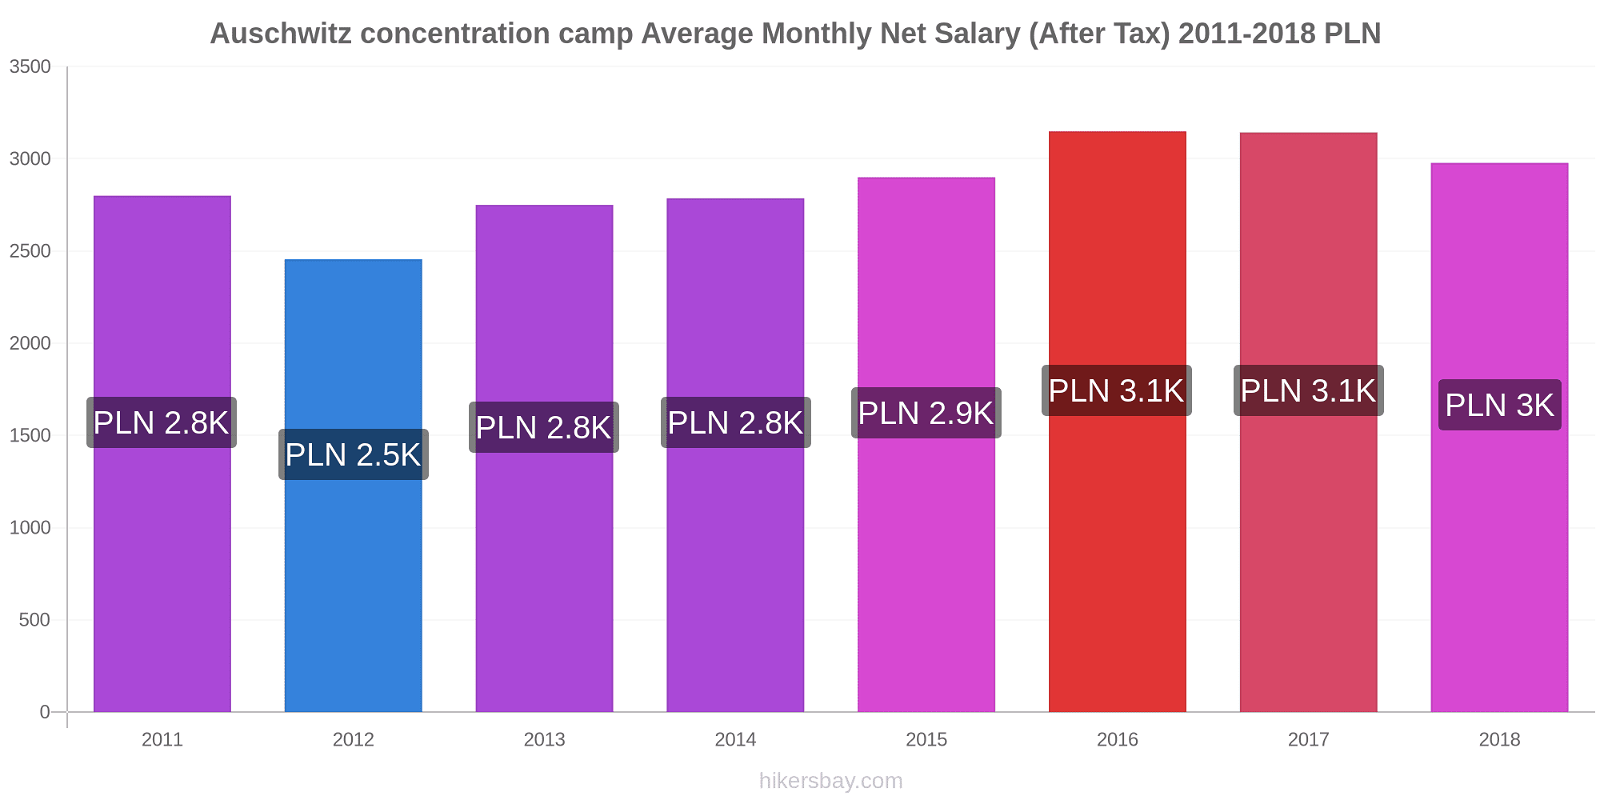 Auschwitz concentration camp price changes Average Monthly Net Salary (After Tax) hikersbay.com